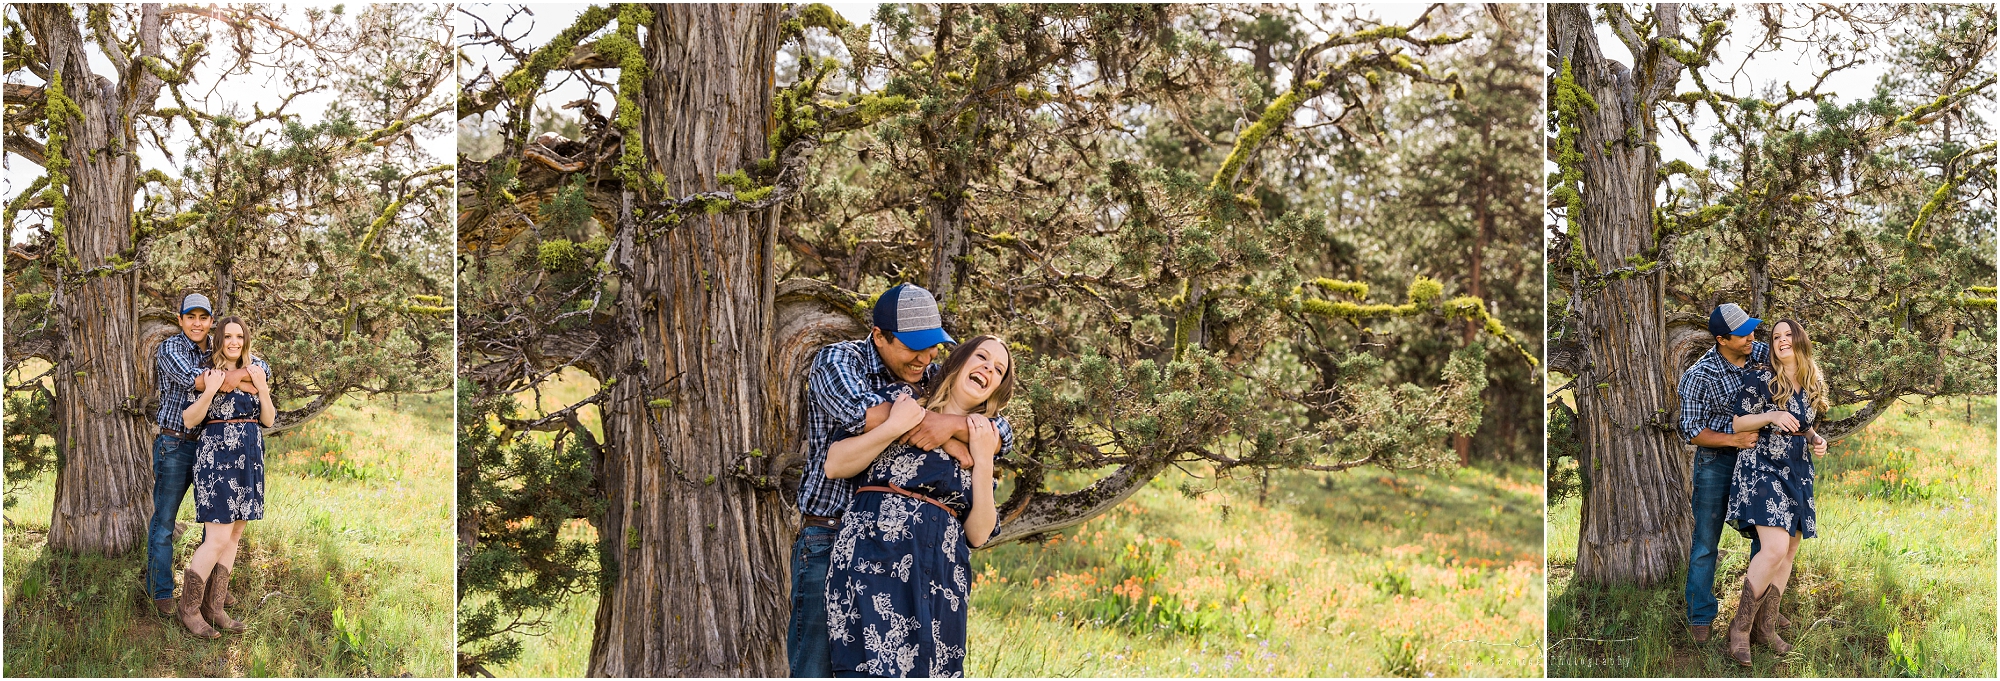 An amazing old growth juniper tree catches the light just perfect at this Oregon outdoor engagement session near Bend. | Erica Swantek Photography